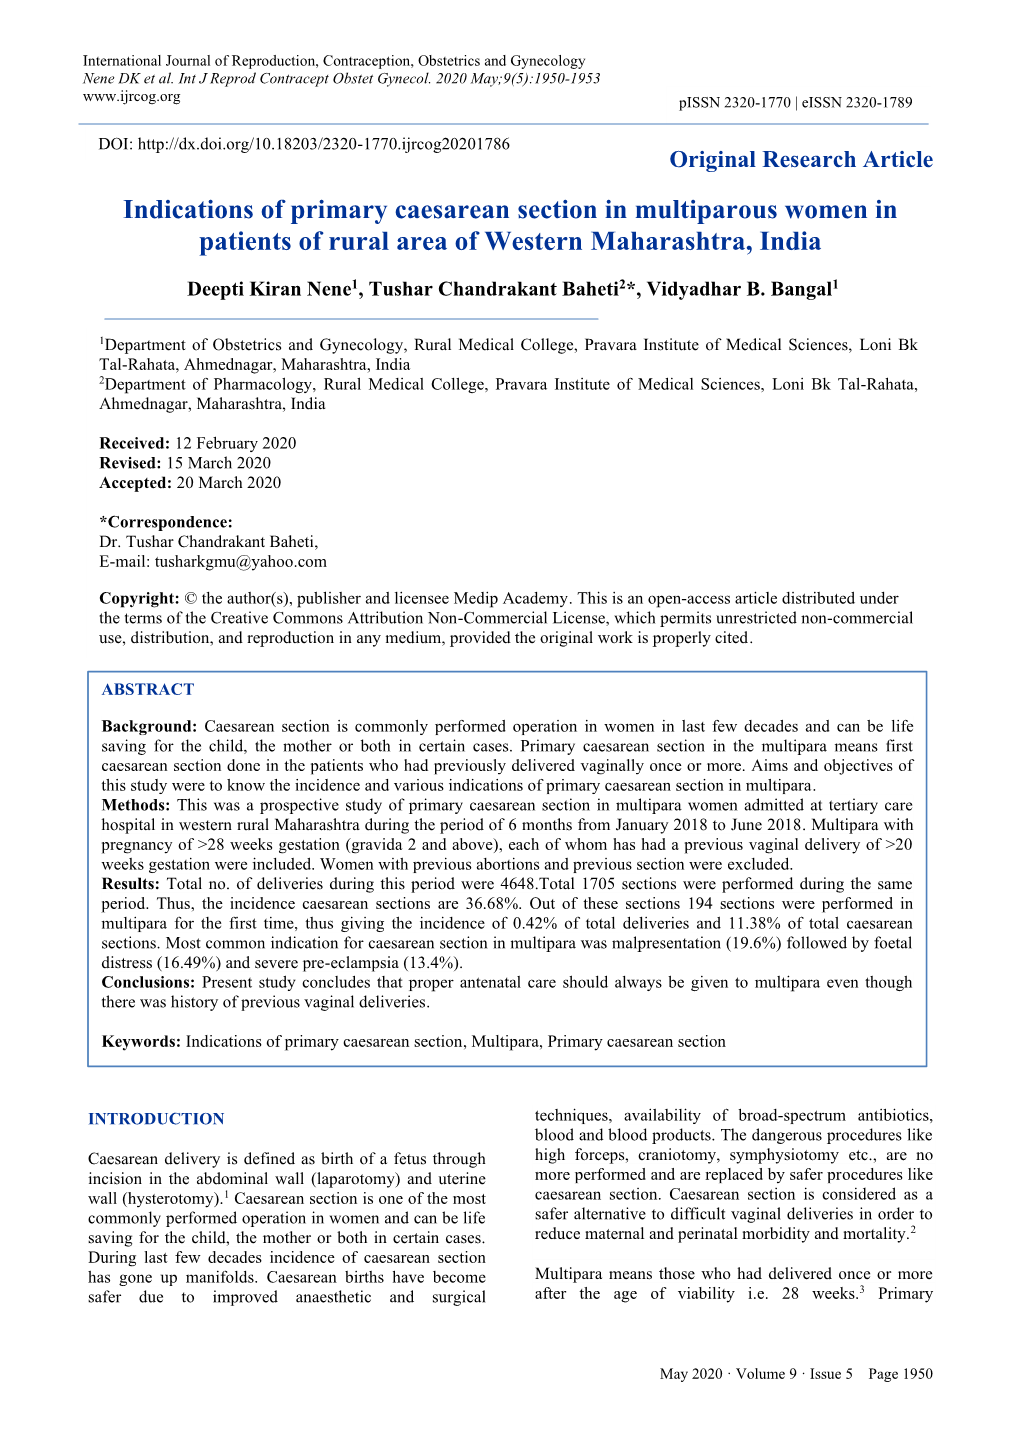 Indications of Primary Caesarean Section in Multiparous Women in Patients of Rural Area of Western Maharashtra, India